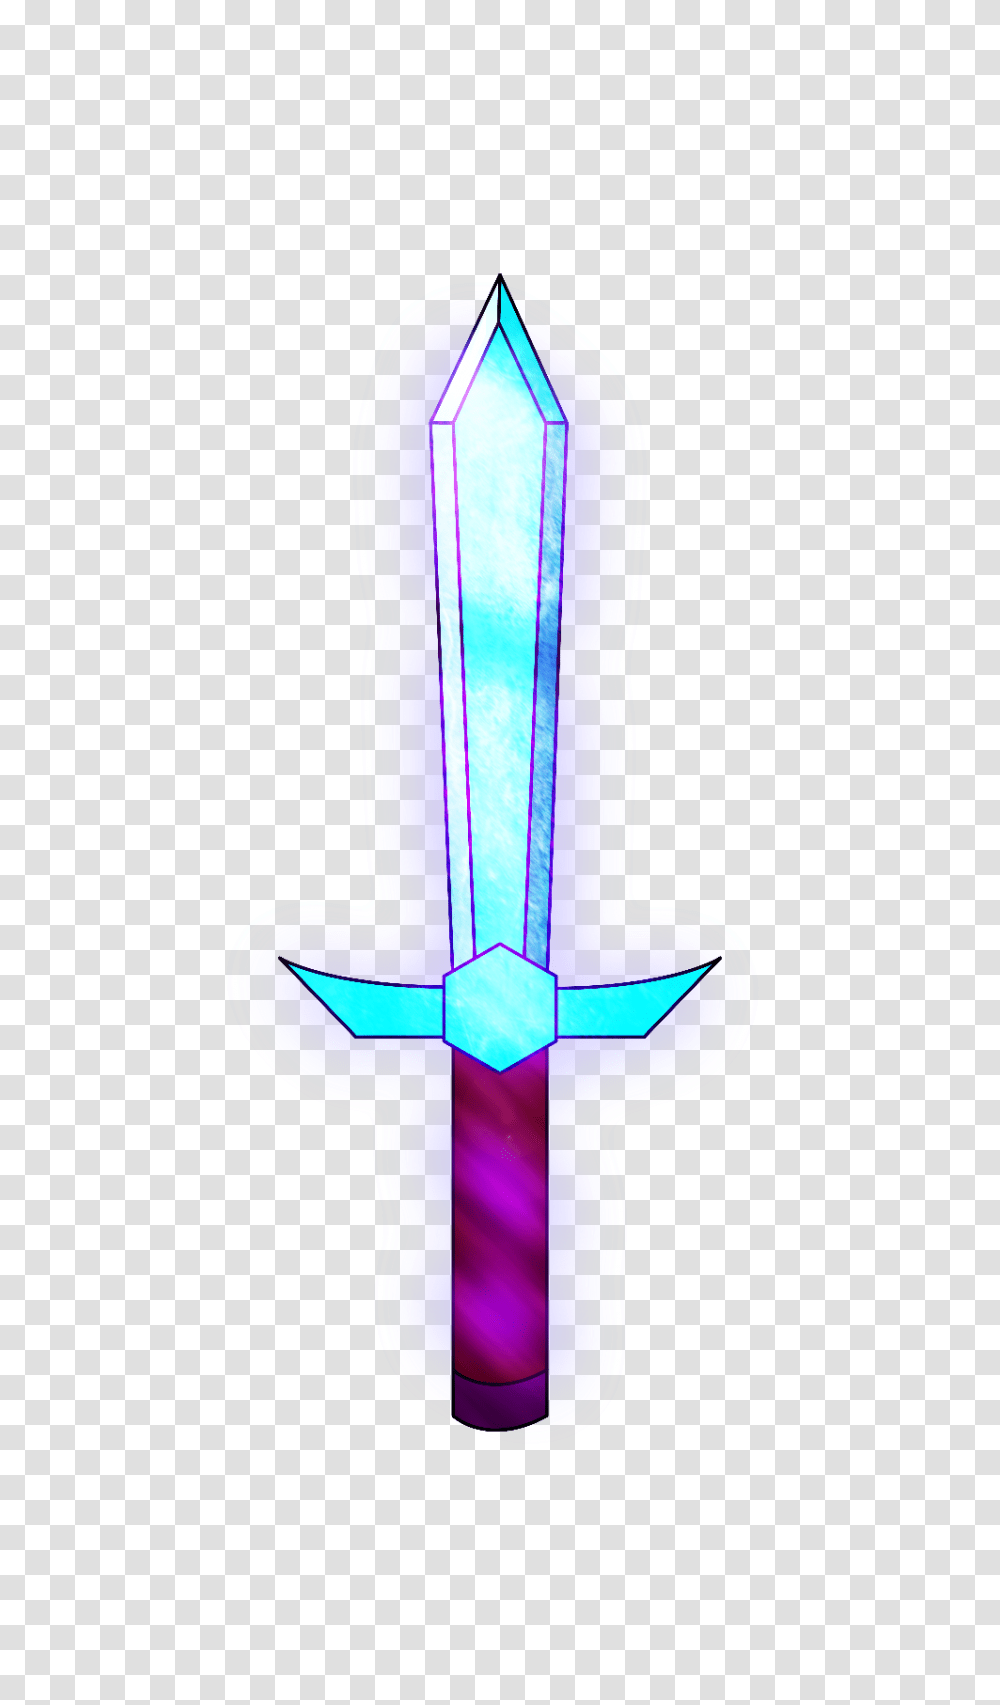 Minecraft Enchanted Diamond Sword Rf Image, Weapon, Weaponry, Blade, Knife Transparent Png